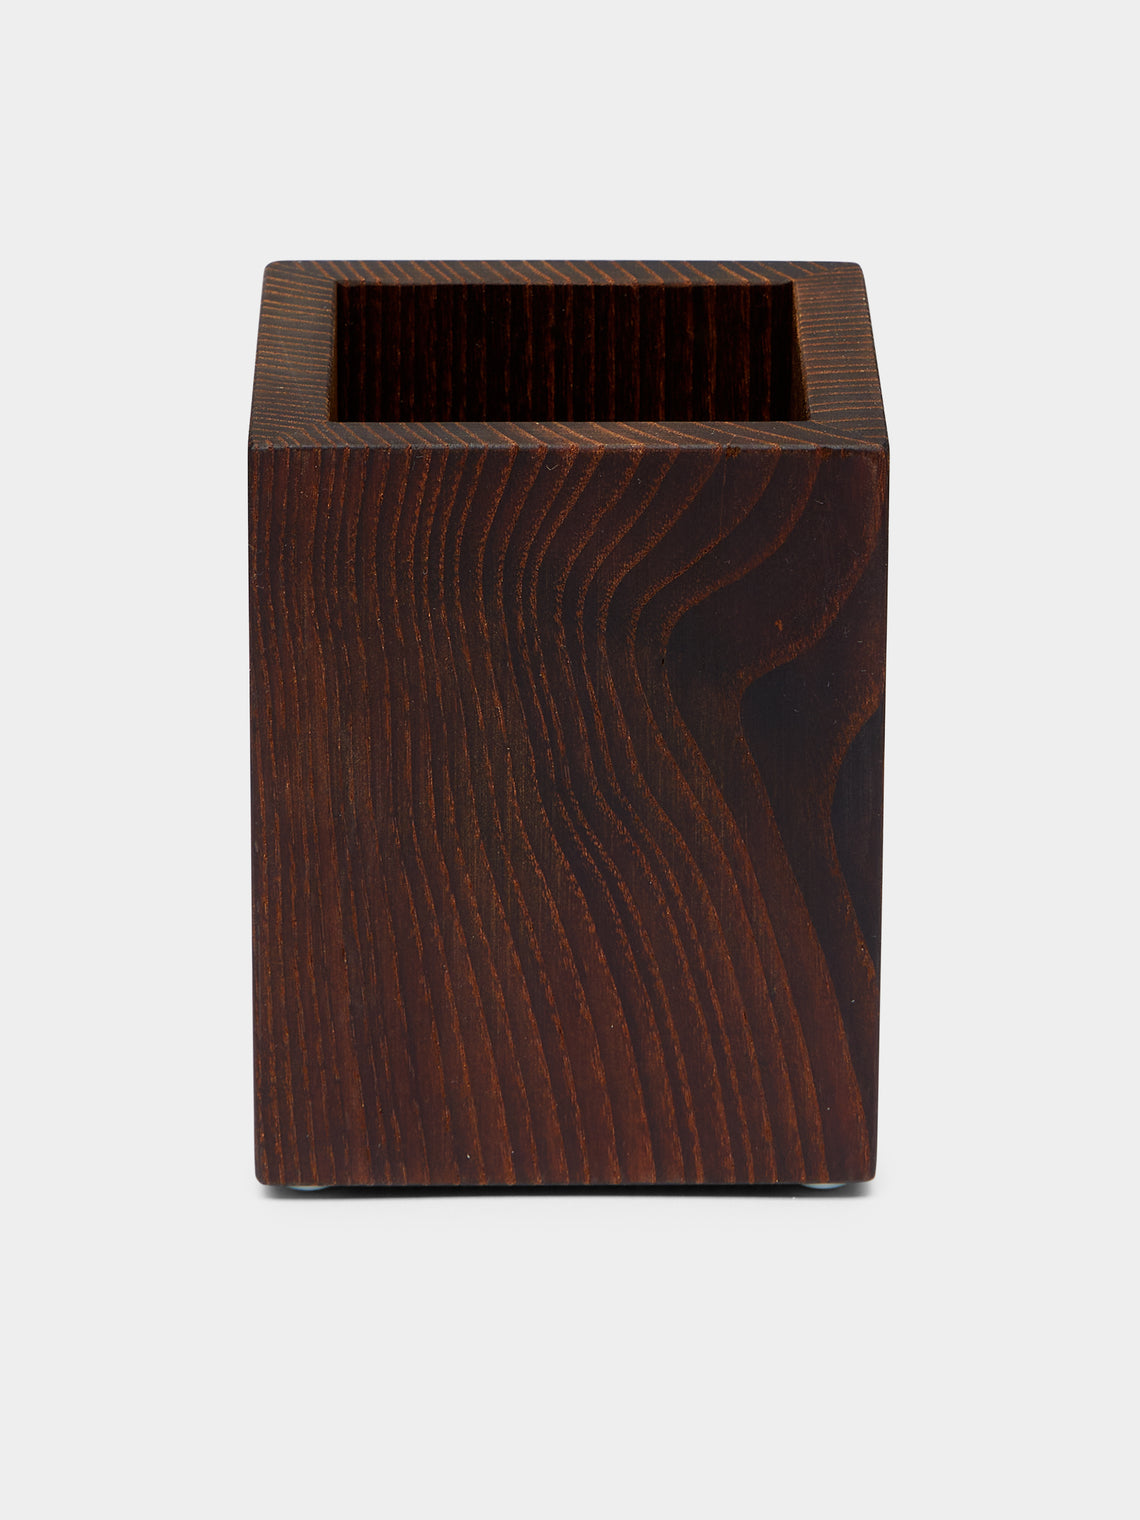 Décor Walther - Ash Wood Toothbrush Holder -  - ABASK - 